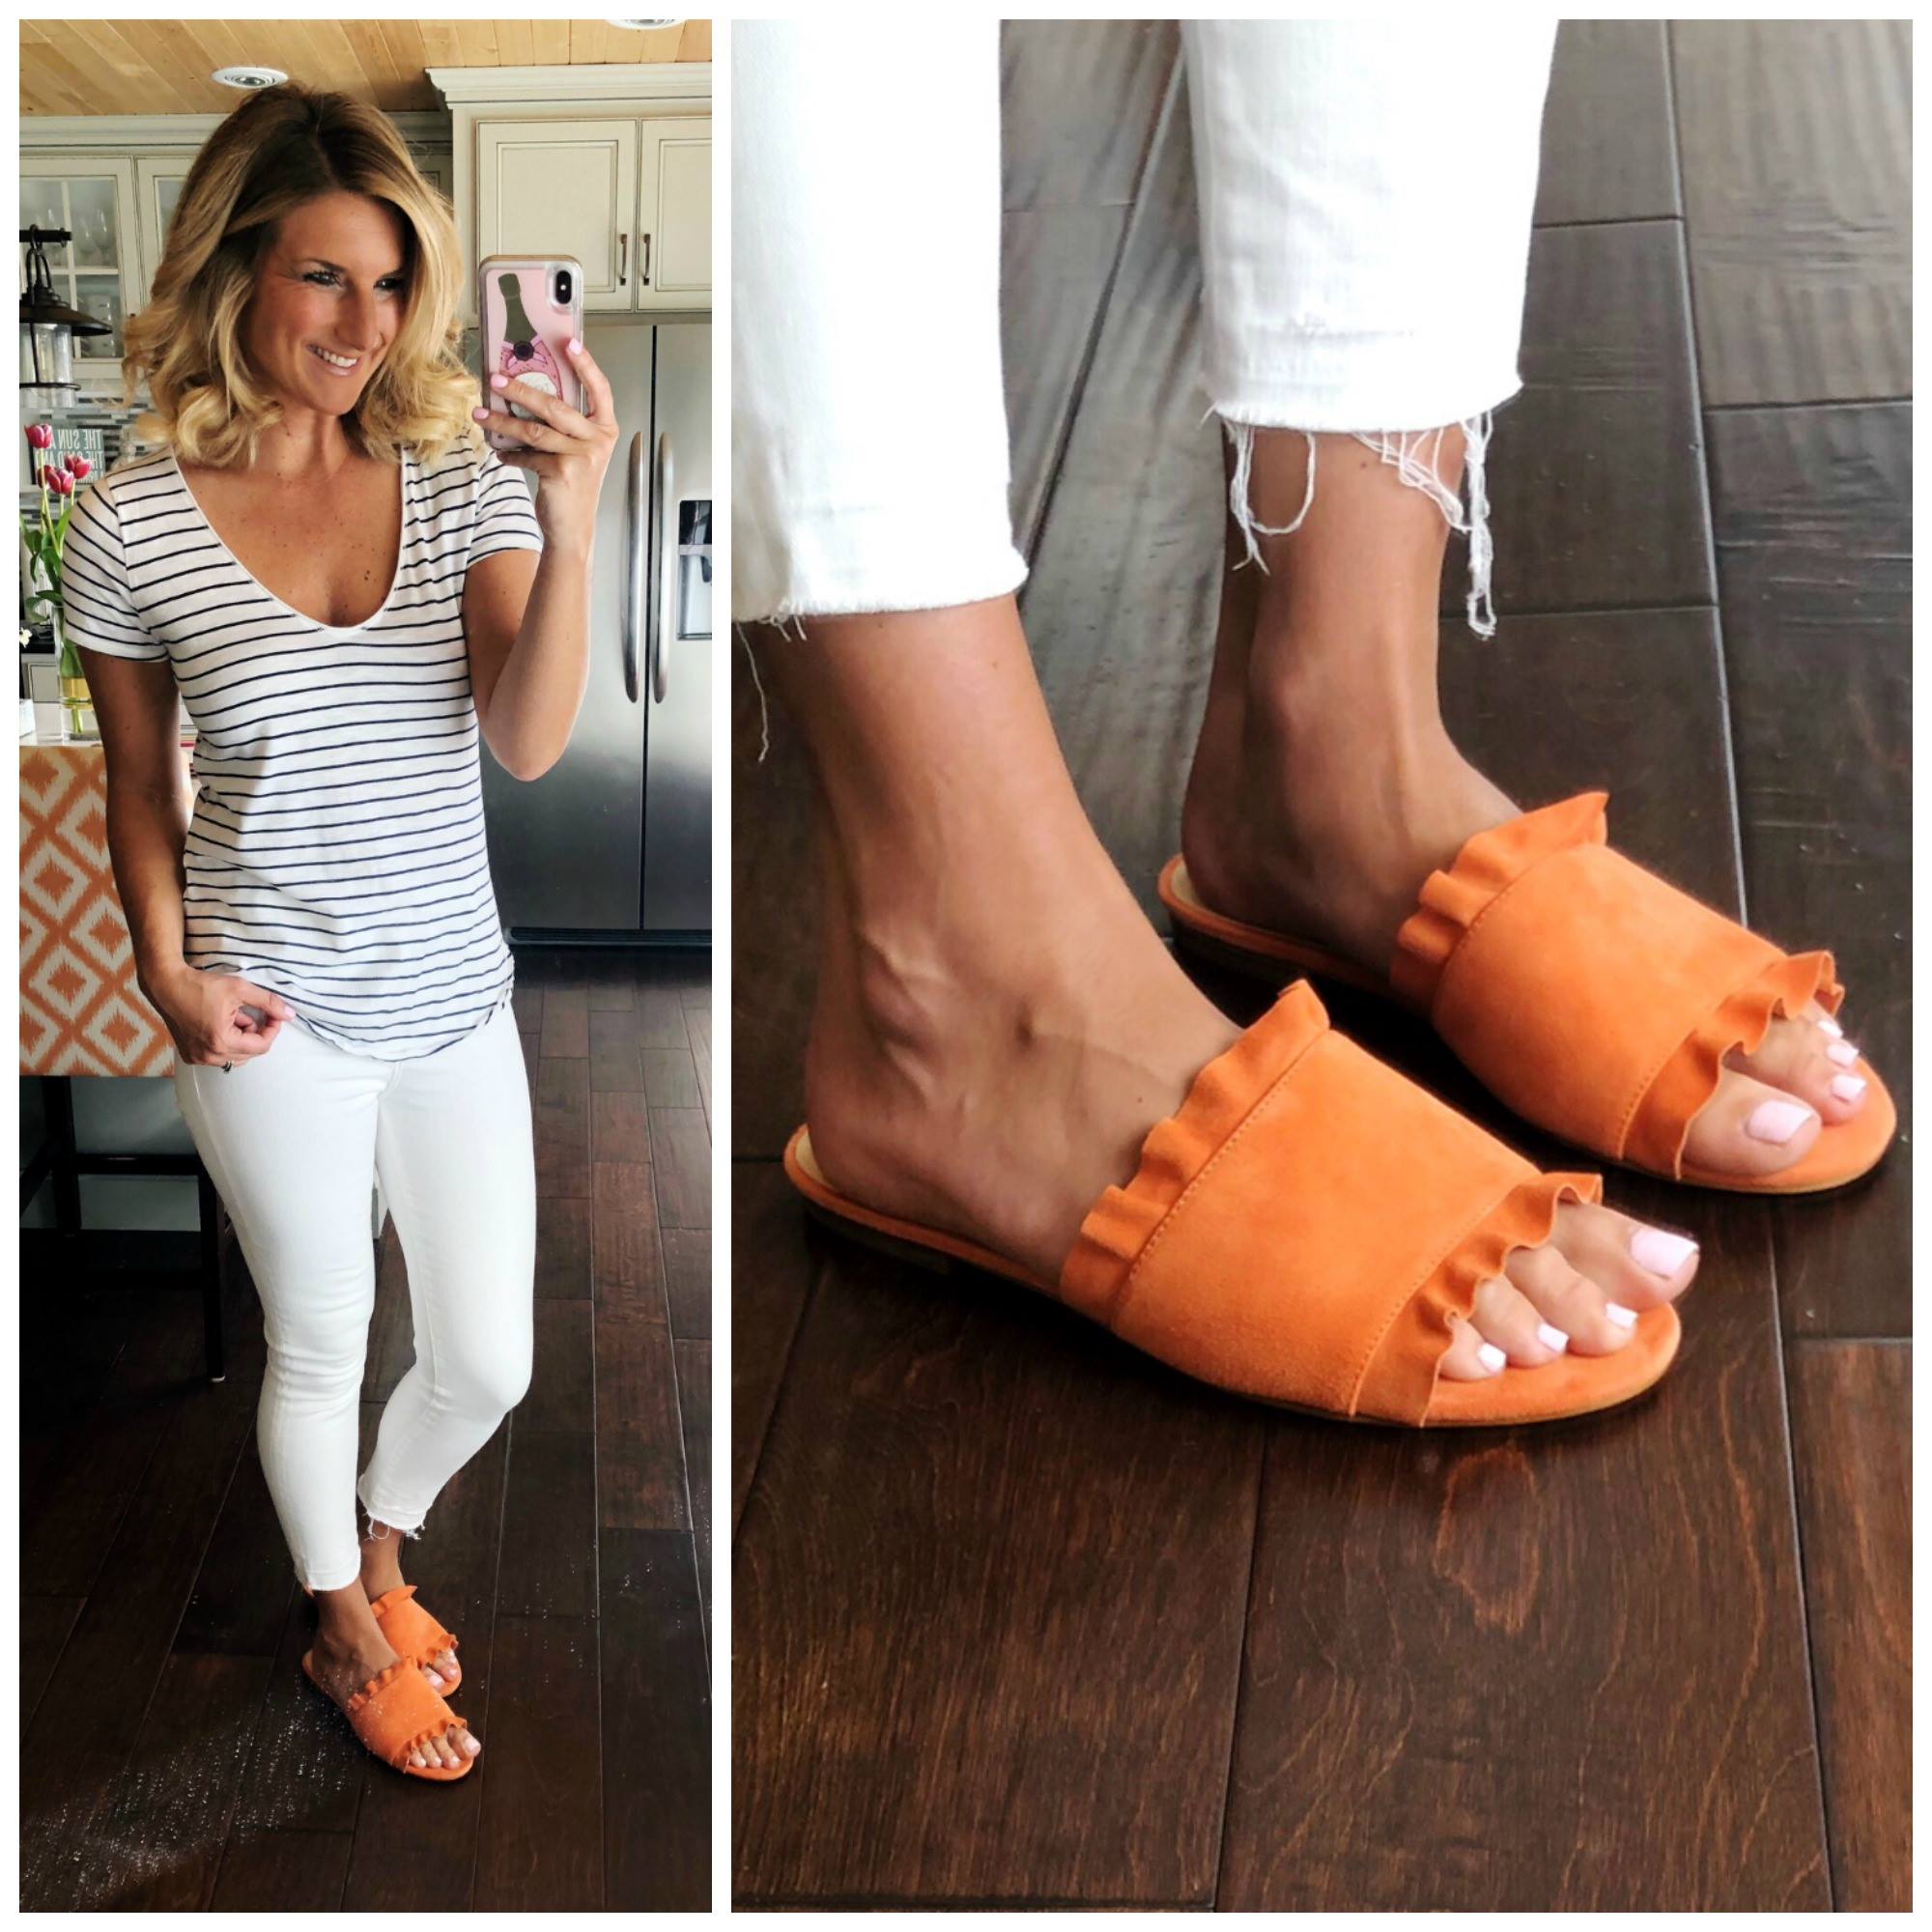 How to wear a bold color shoe // Non sheer white jeans under $60